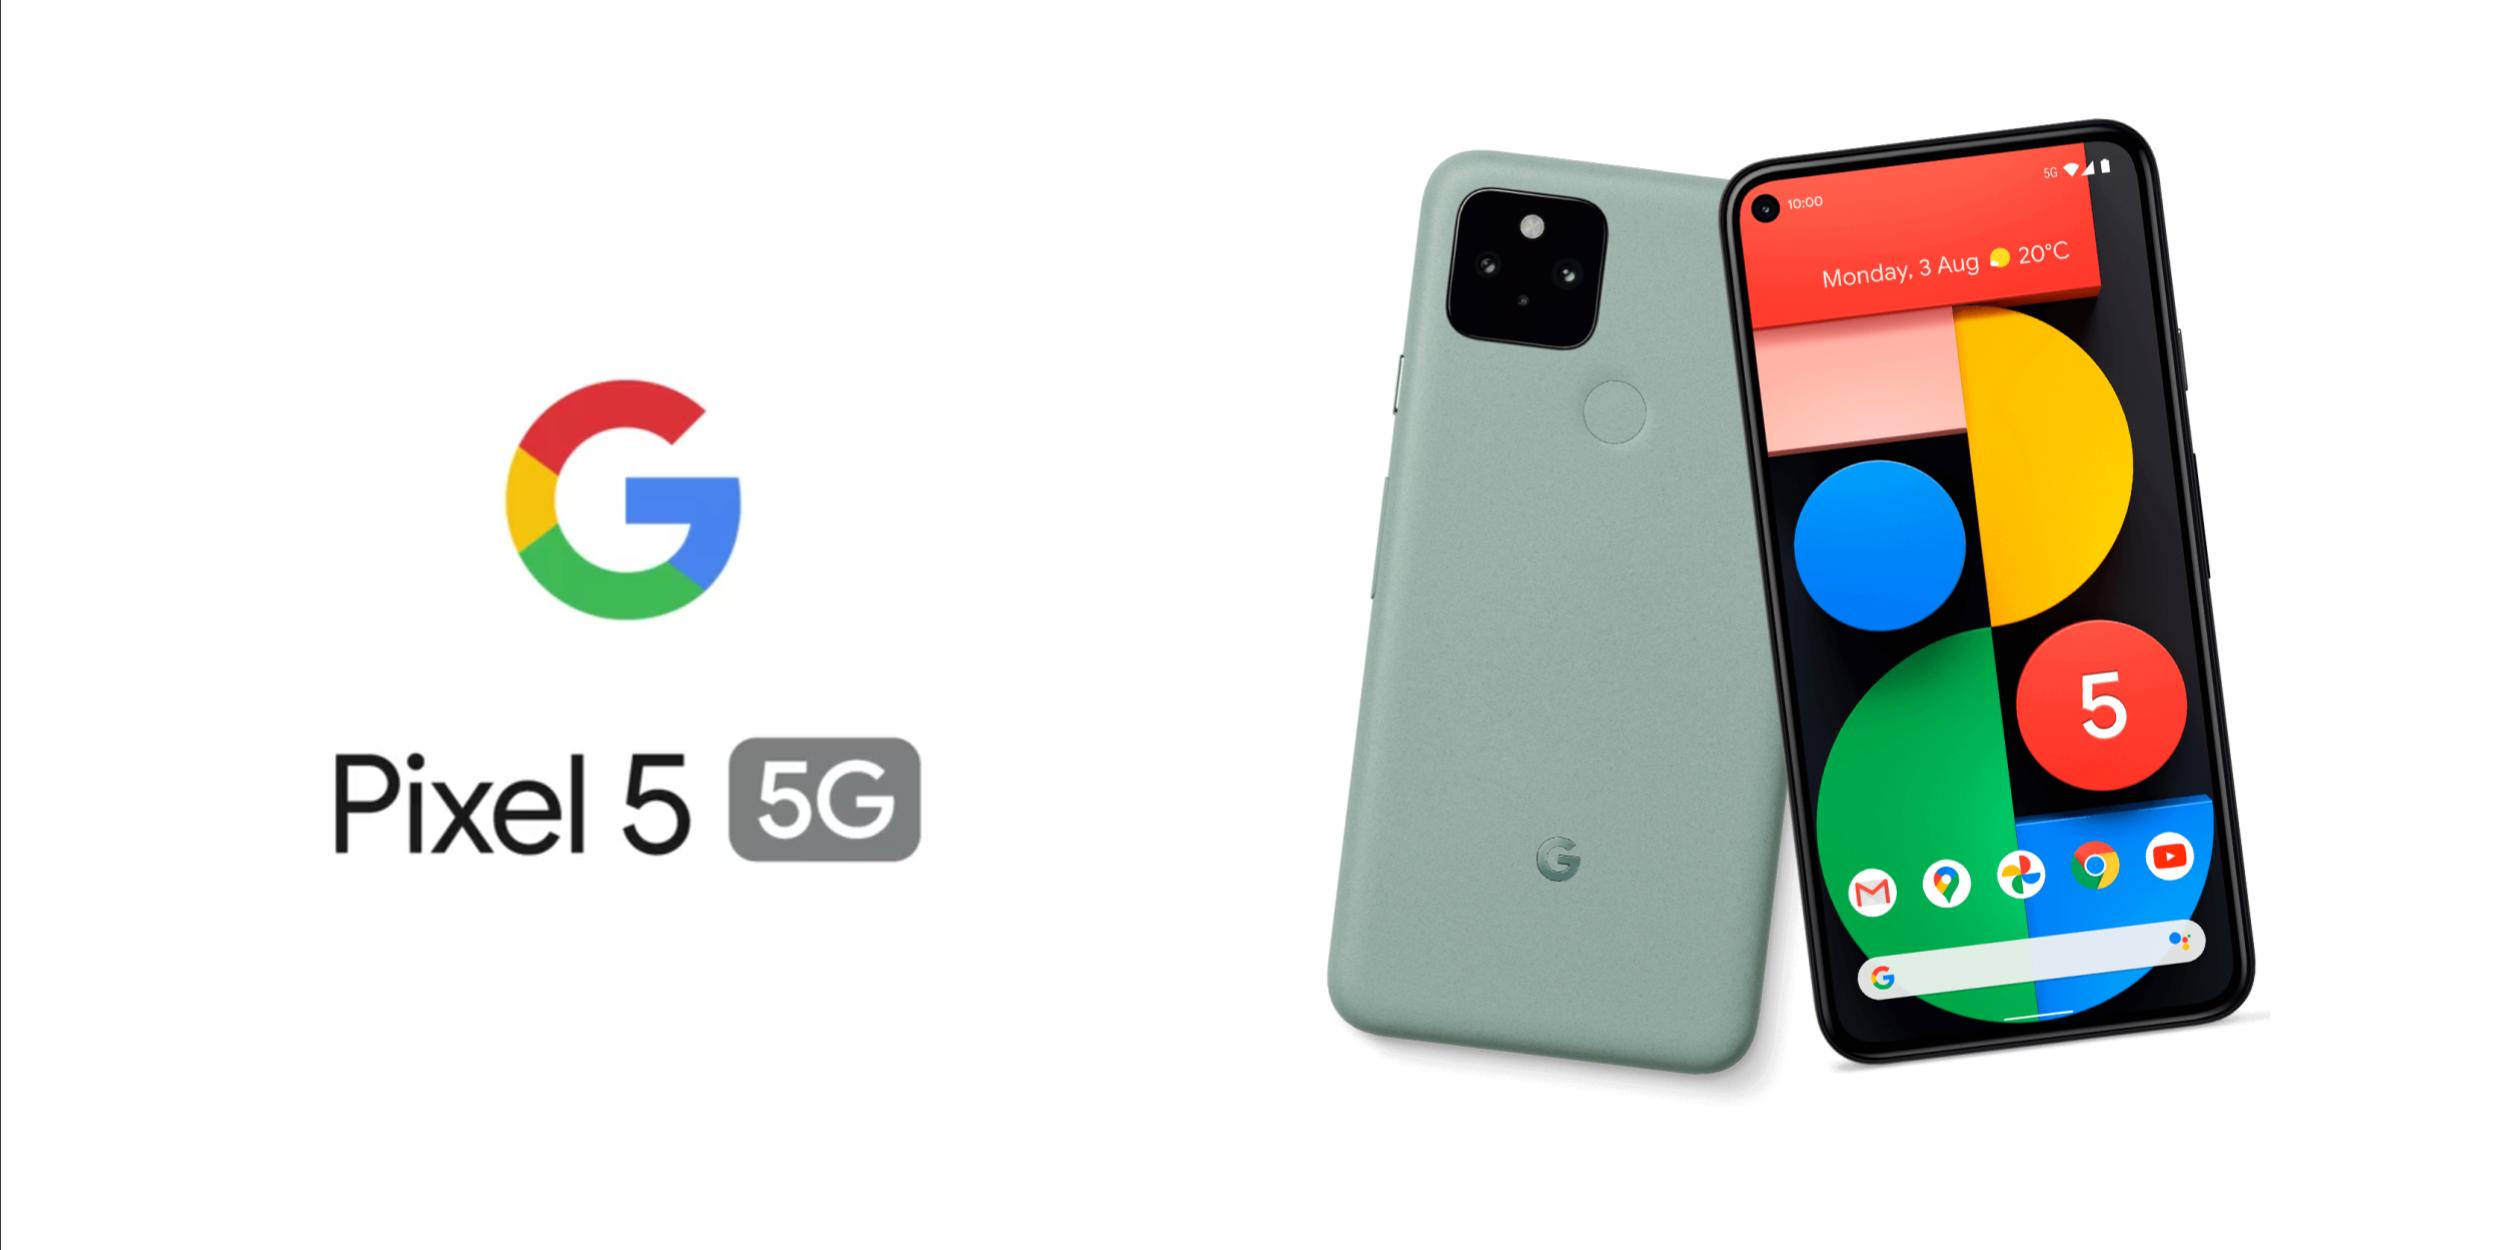 Google announces Pixel 5 with wide-angle lens, 8GB RAM - 9to5Google